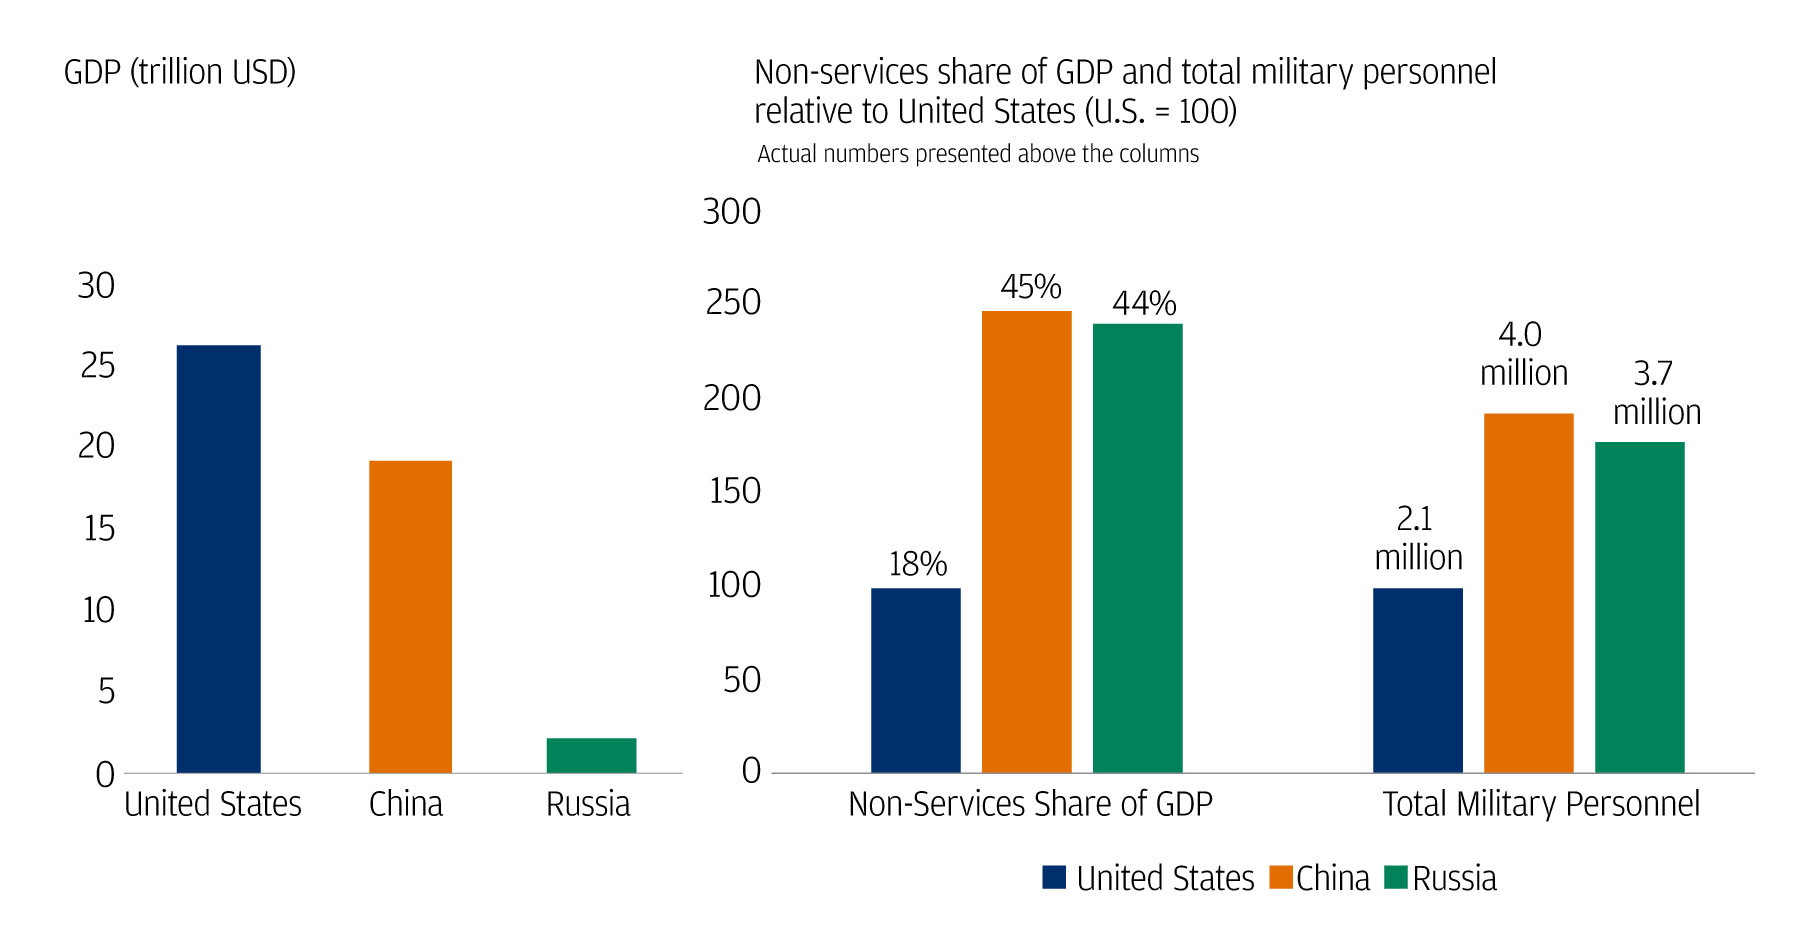 The chart on the left describes the Gross Domestic Product of United States vs China vs Russia. The chart on the right is broken up into two sections. The left section describes the non-services percentage share of GDP for US vs China vs Russia. The right section describes the total military personnel for US vs China vs Russia (million).